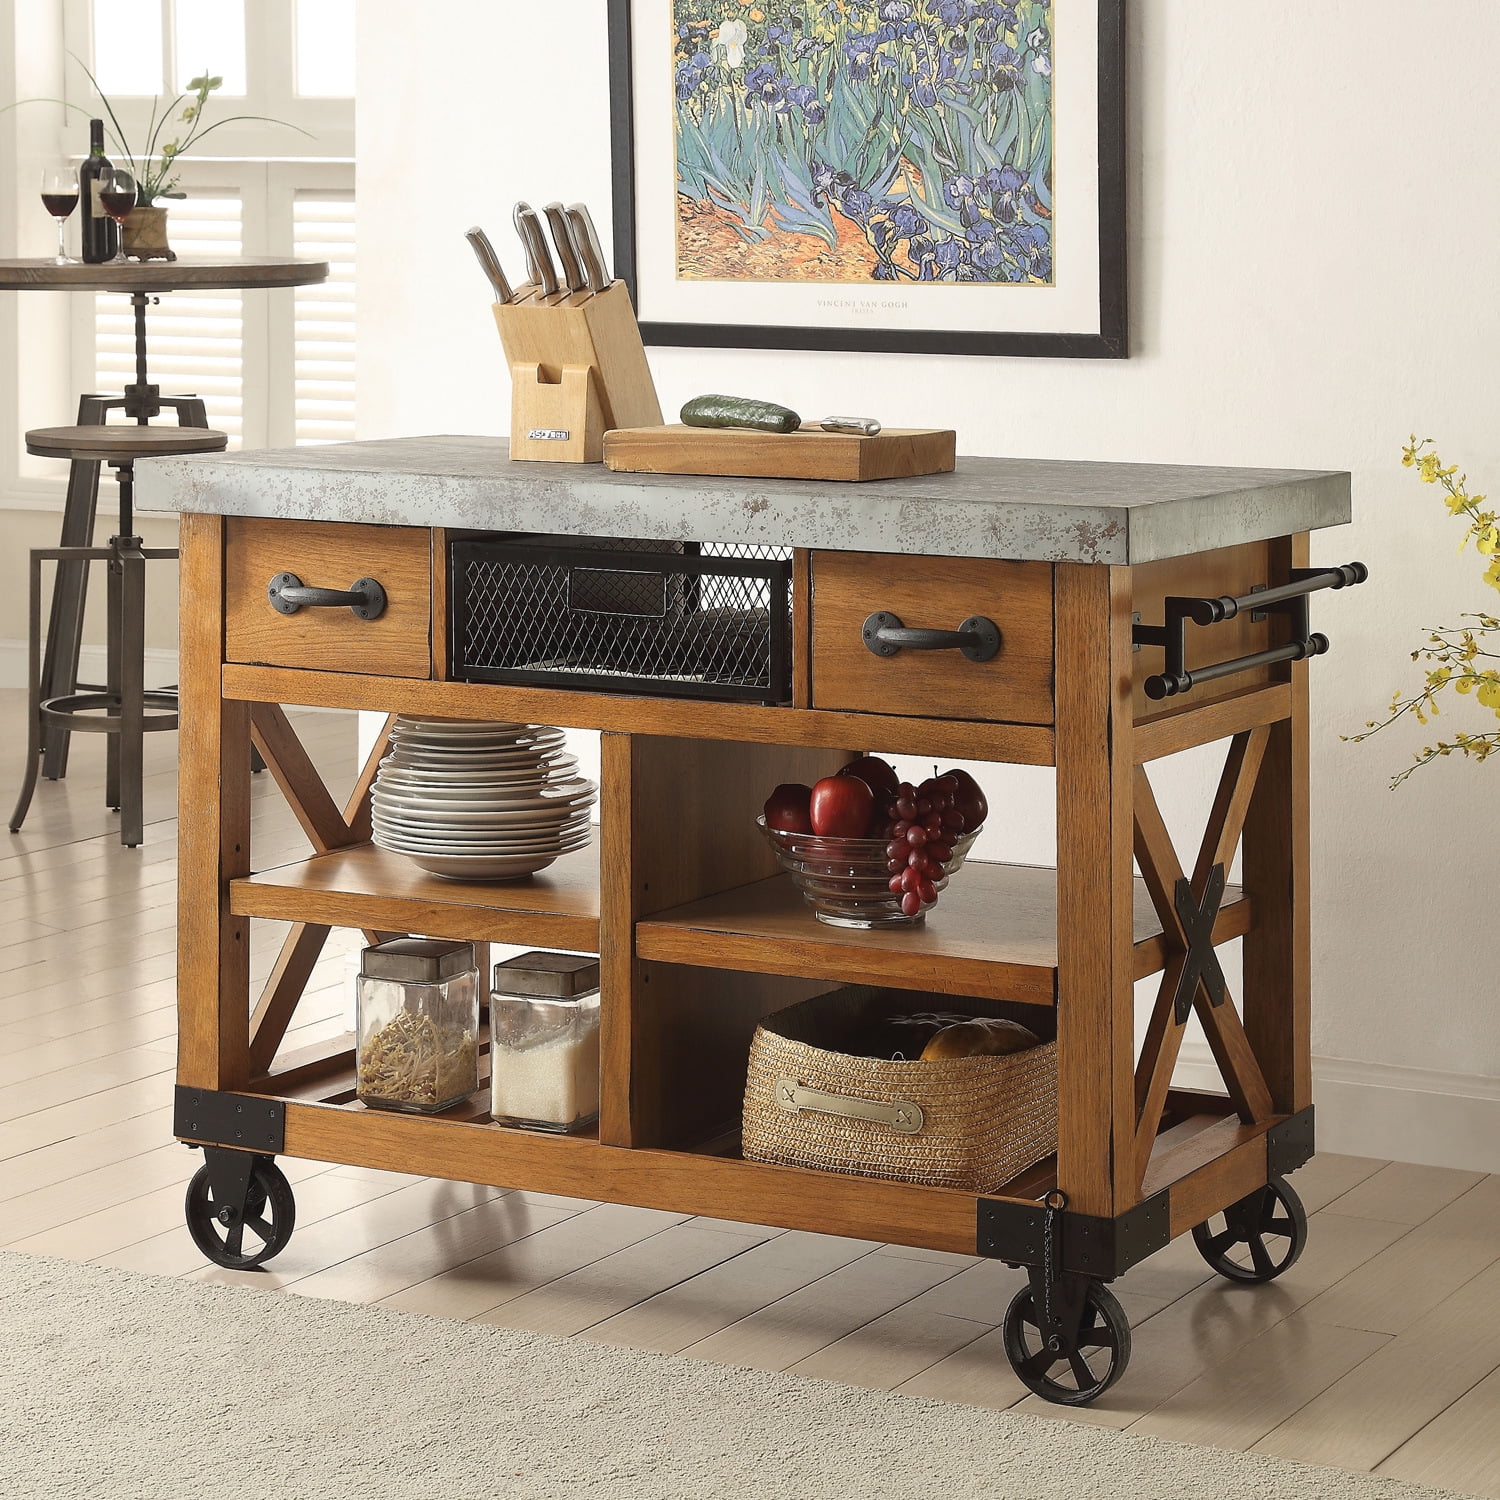 Kitchen Cart With Wheels,rolling Kitchen Island With Drawers And Shelves For Dining Storage